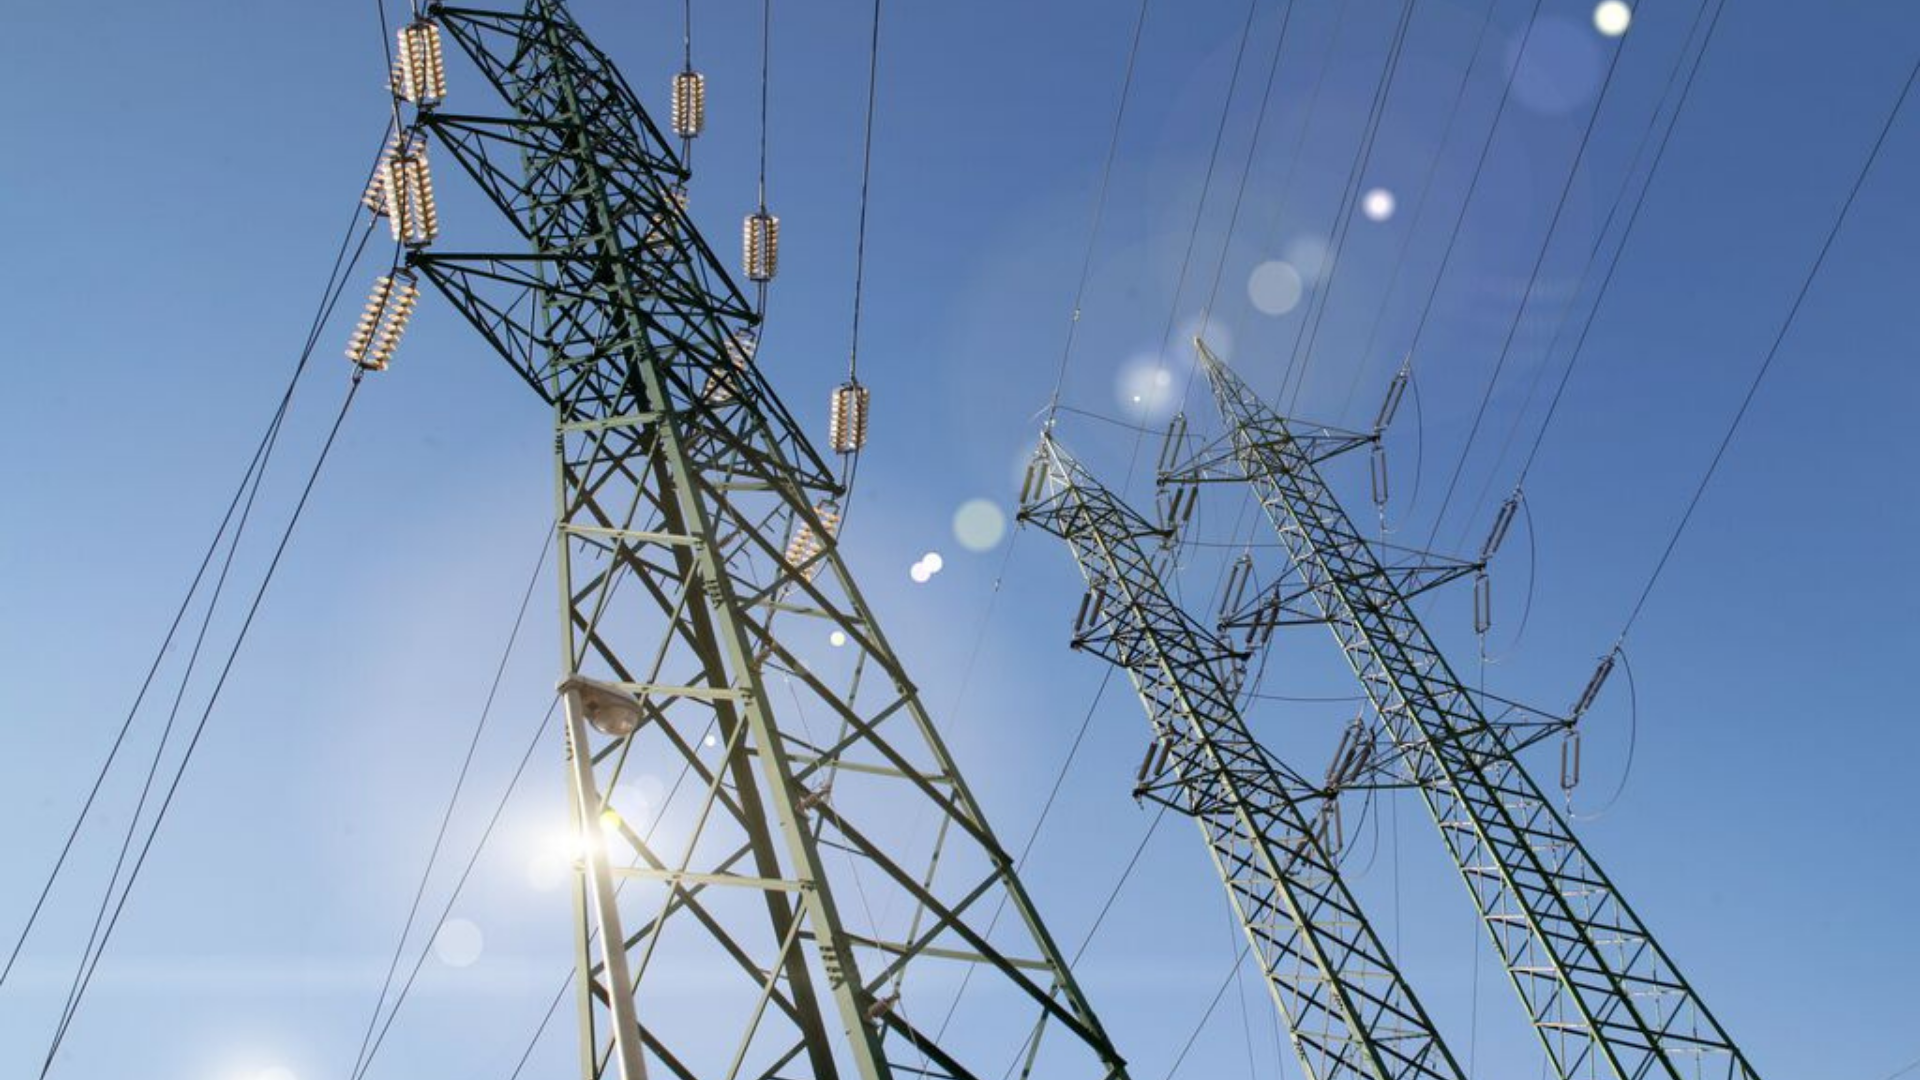 UK electricity pylon distributing power to businesses and homes.